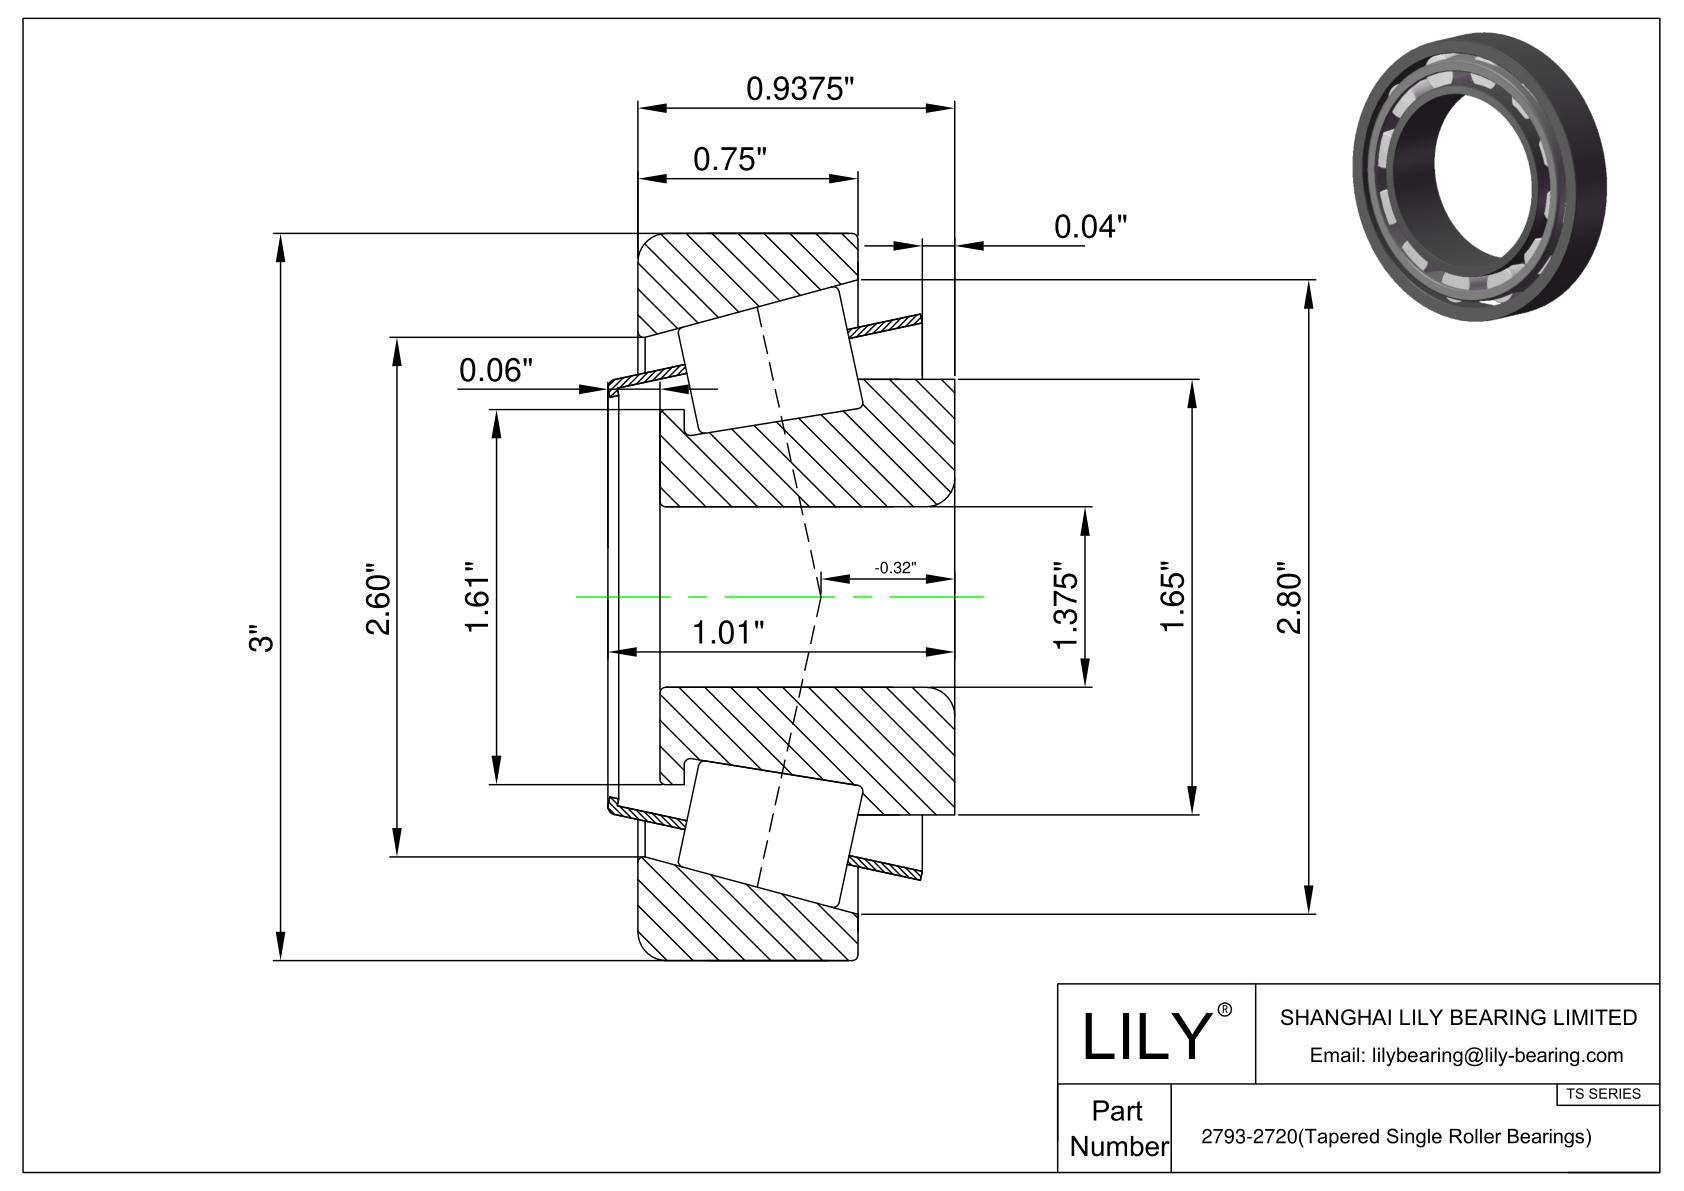 2793-2720 TS (Tapered Single Roller Bearings) (Imperial) cad drawing